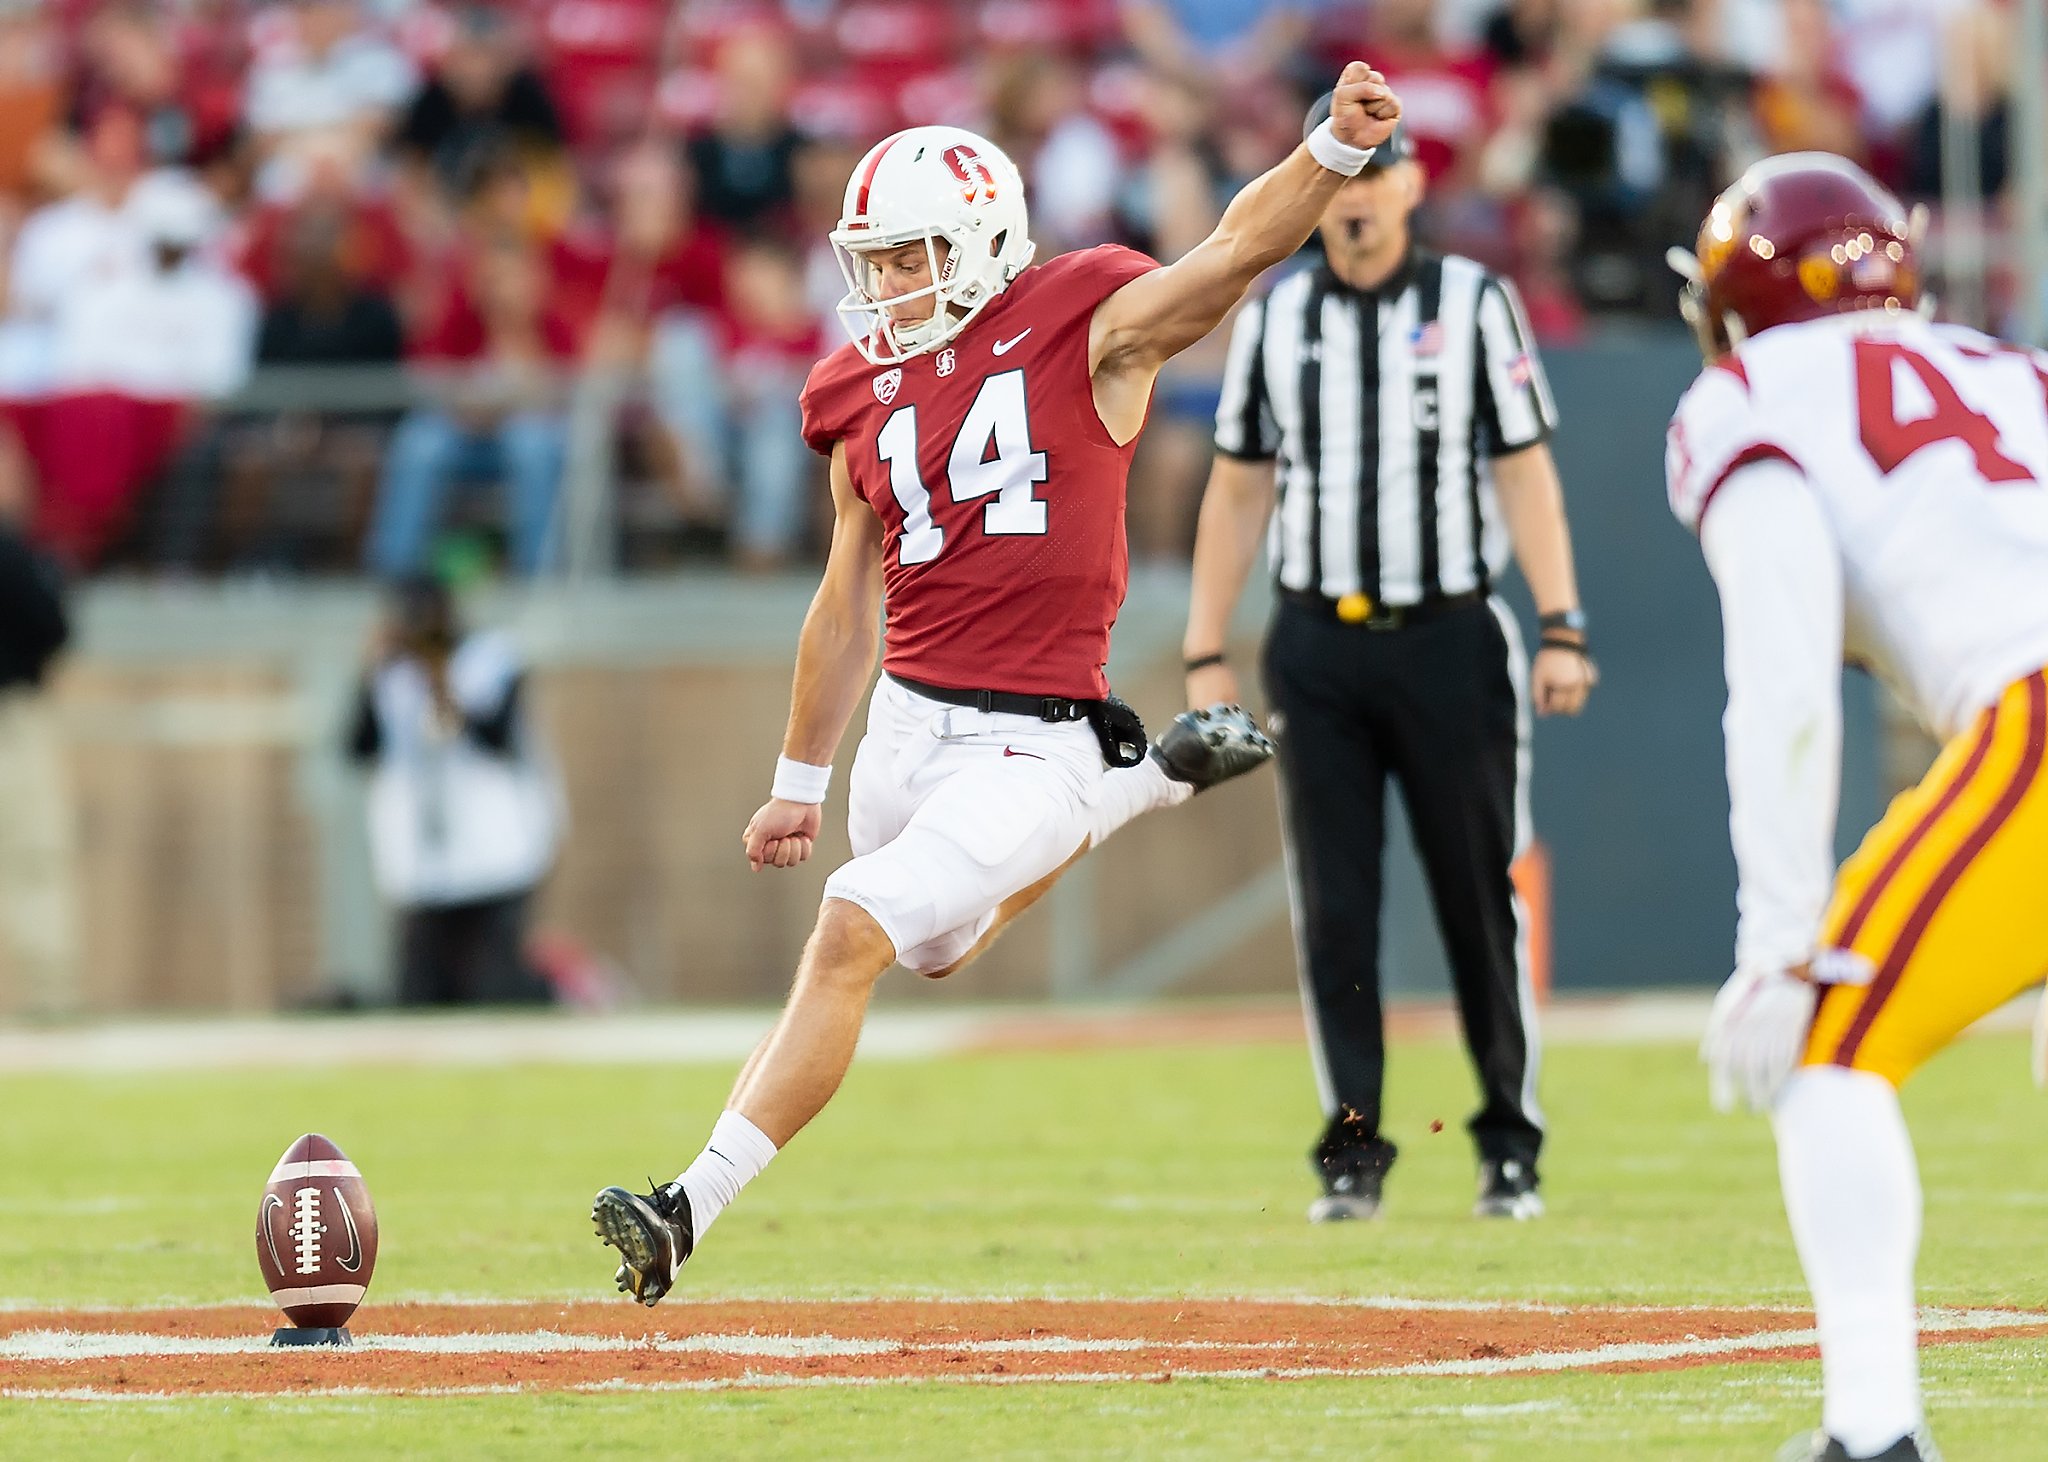 Big Game Stanford seniors eyeing another spotless record against Cal